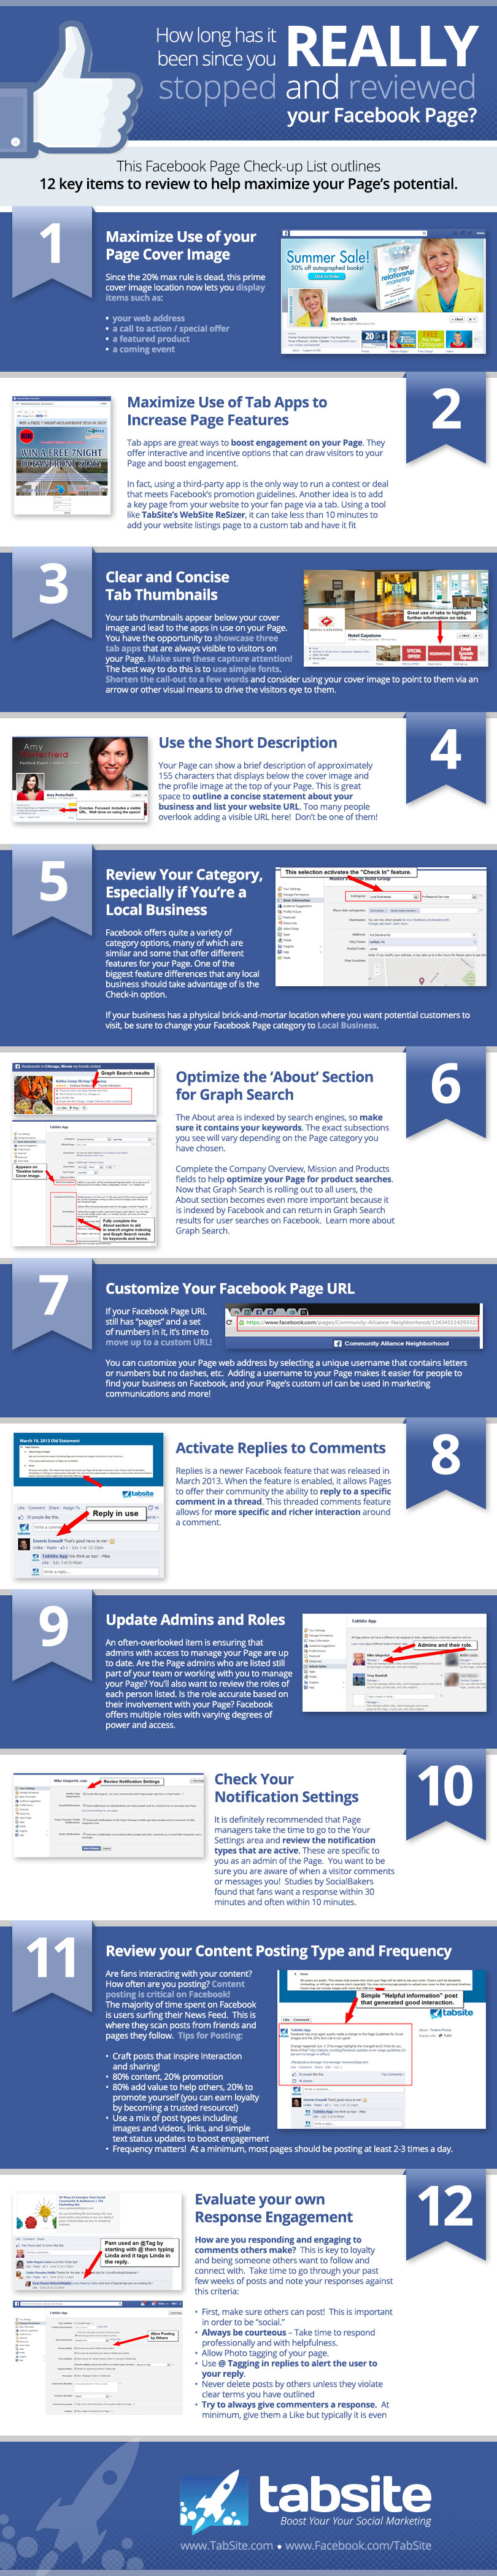 Simple Tips For Facebook Page admins and Managers: infographic